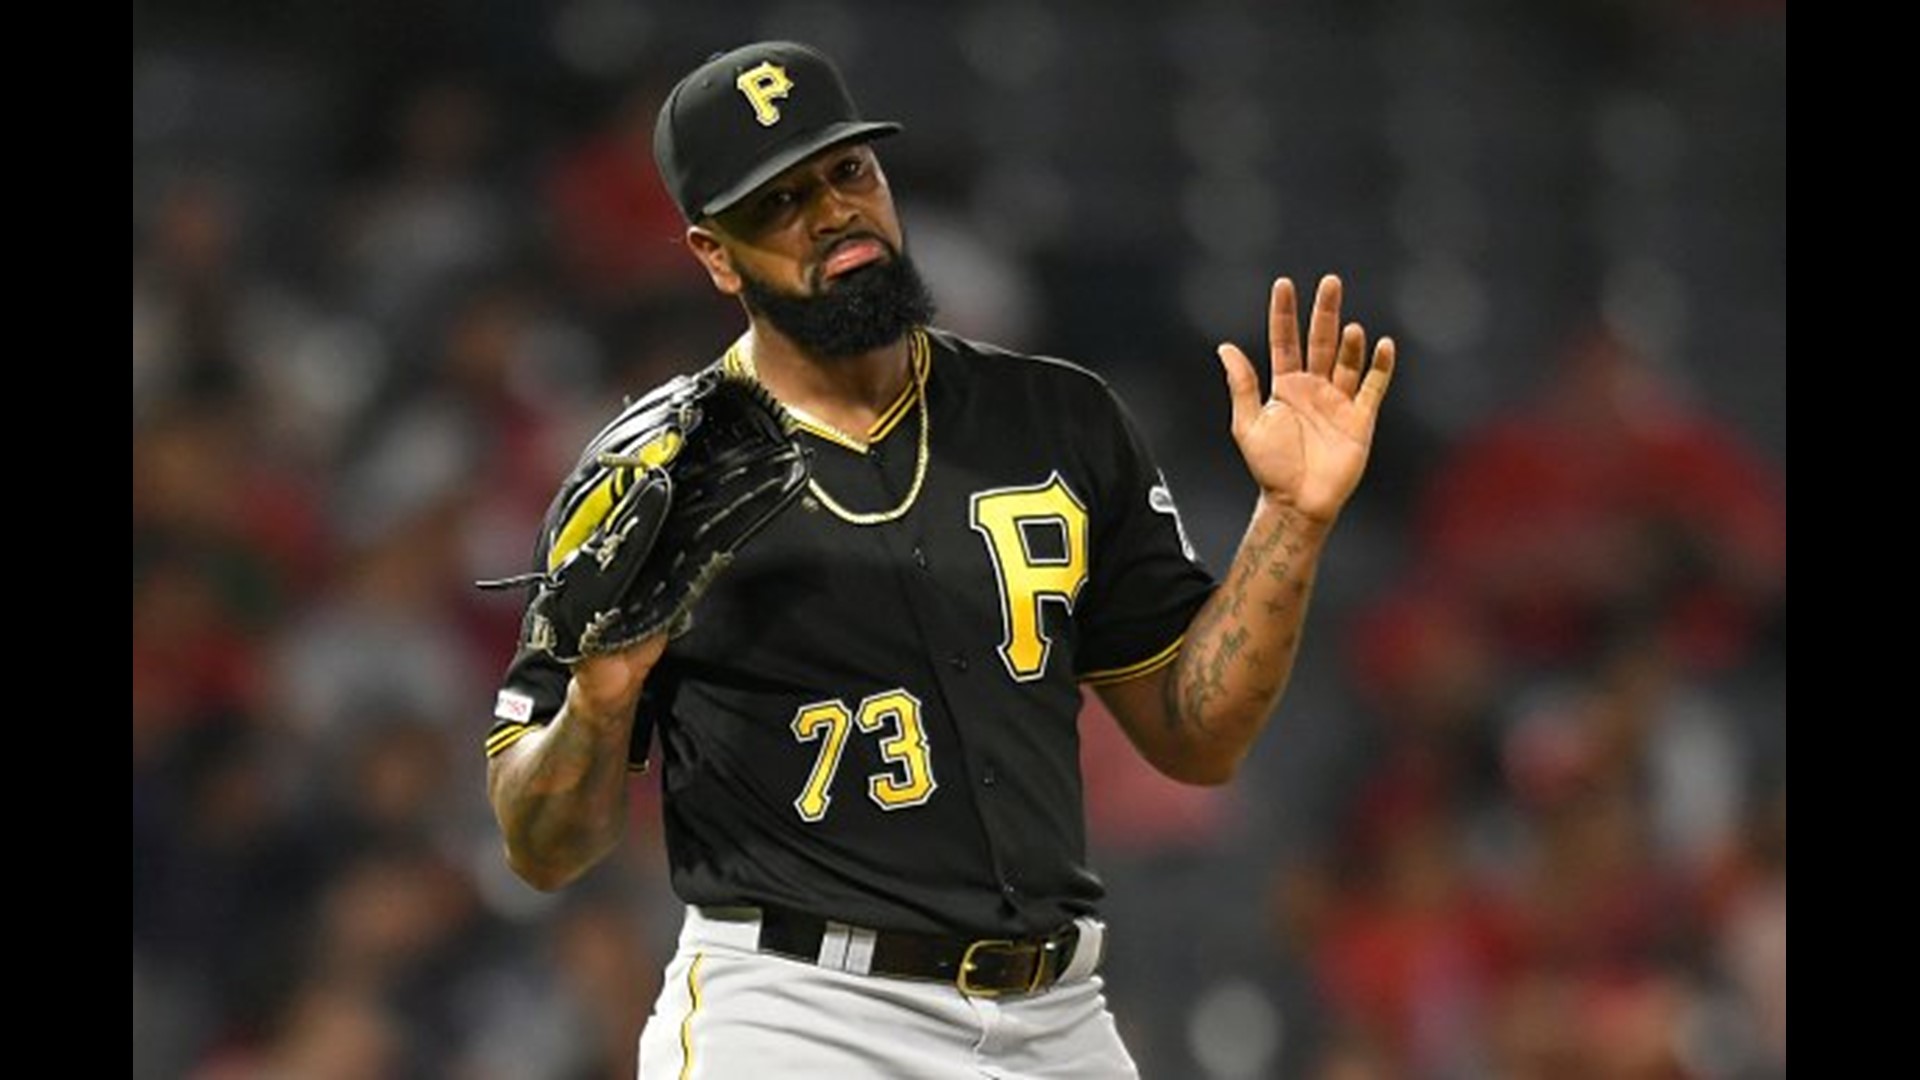 Pirates Closer Felipe Vazquez Arrested Accused Of Having Sexual Relationship With 13 Year Old 9326